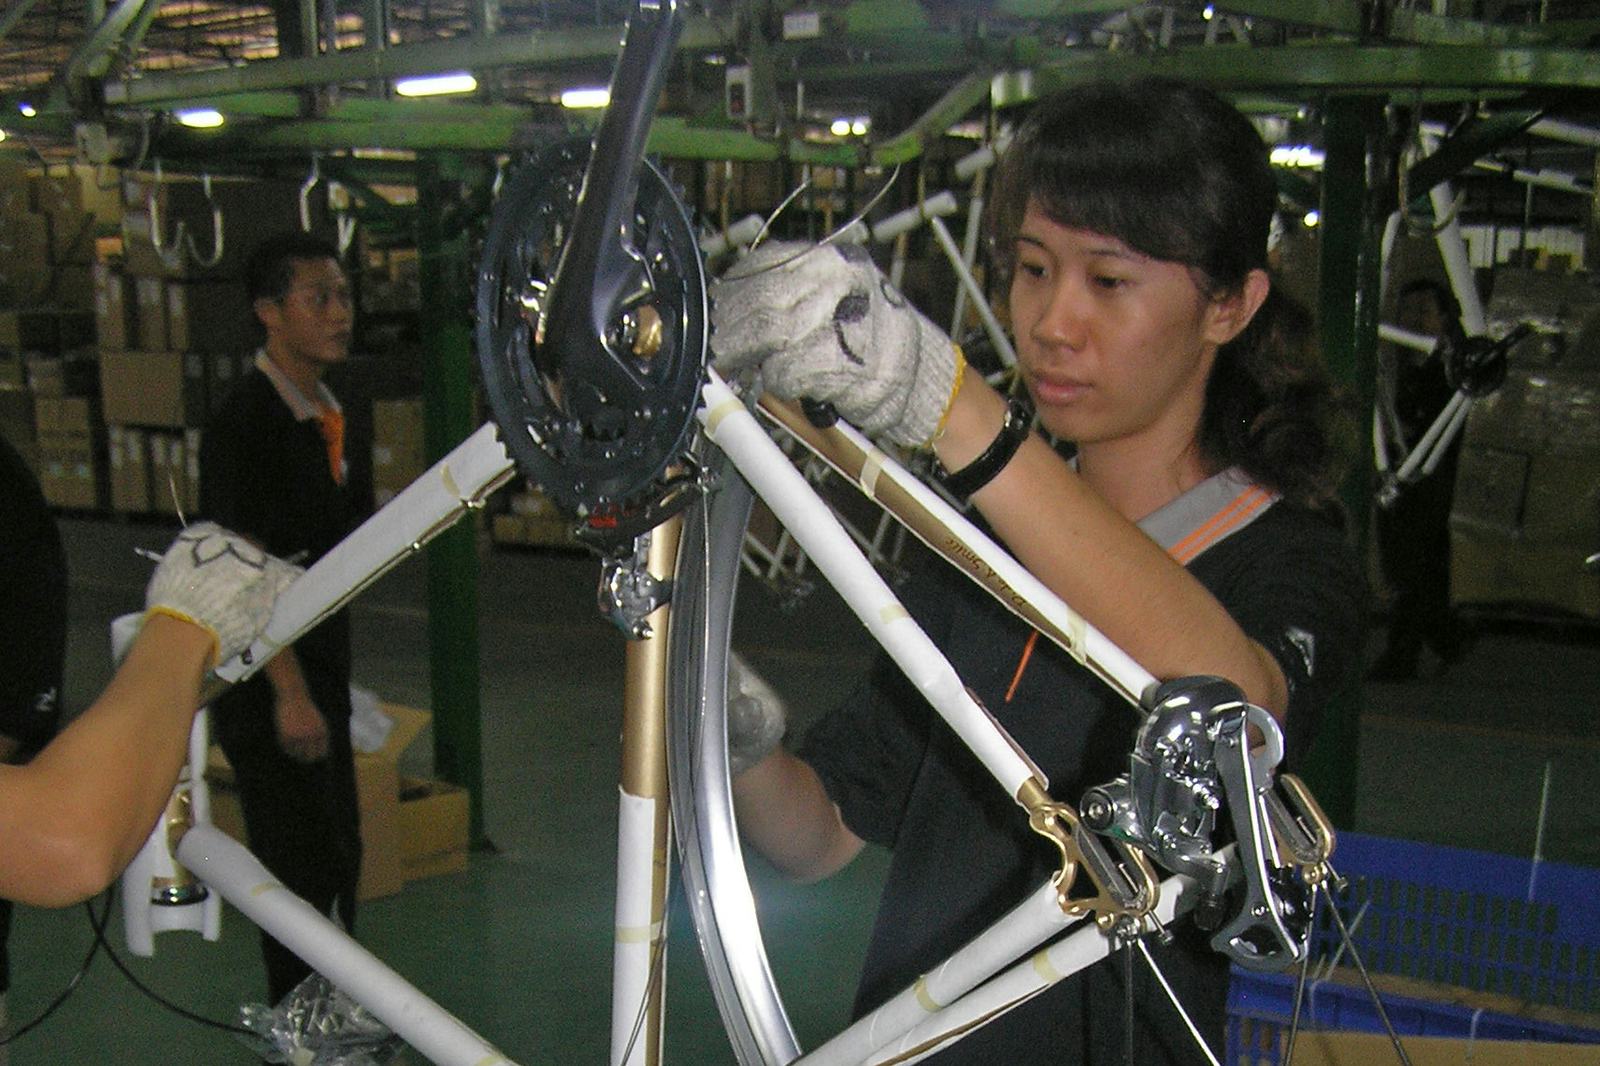 Currently Cambodia is the second largest exporter of bicycles to the European Union after Taiwan. 